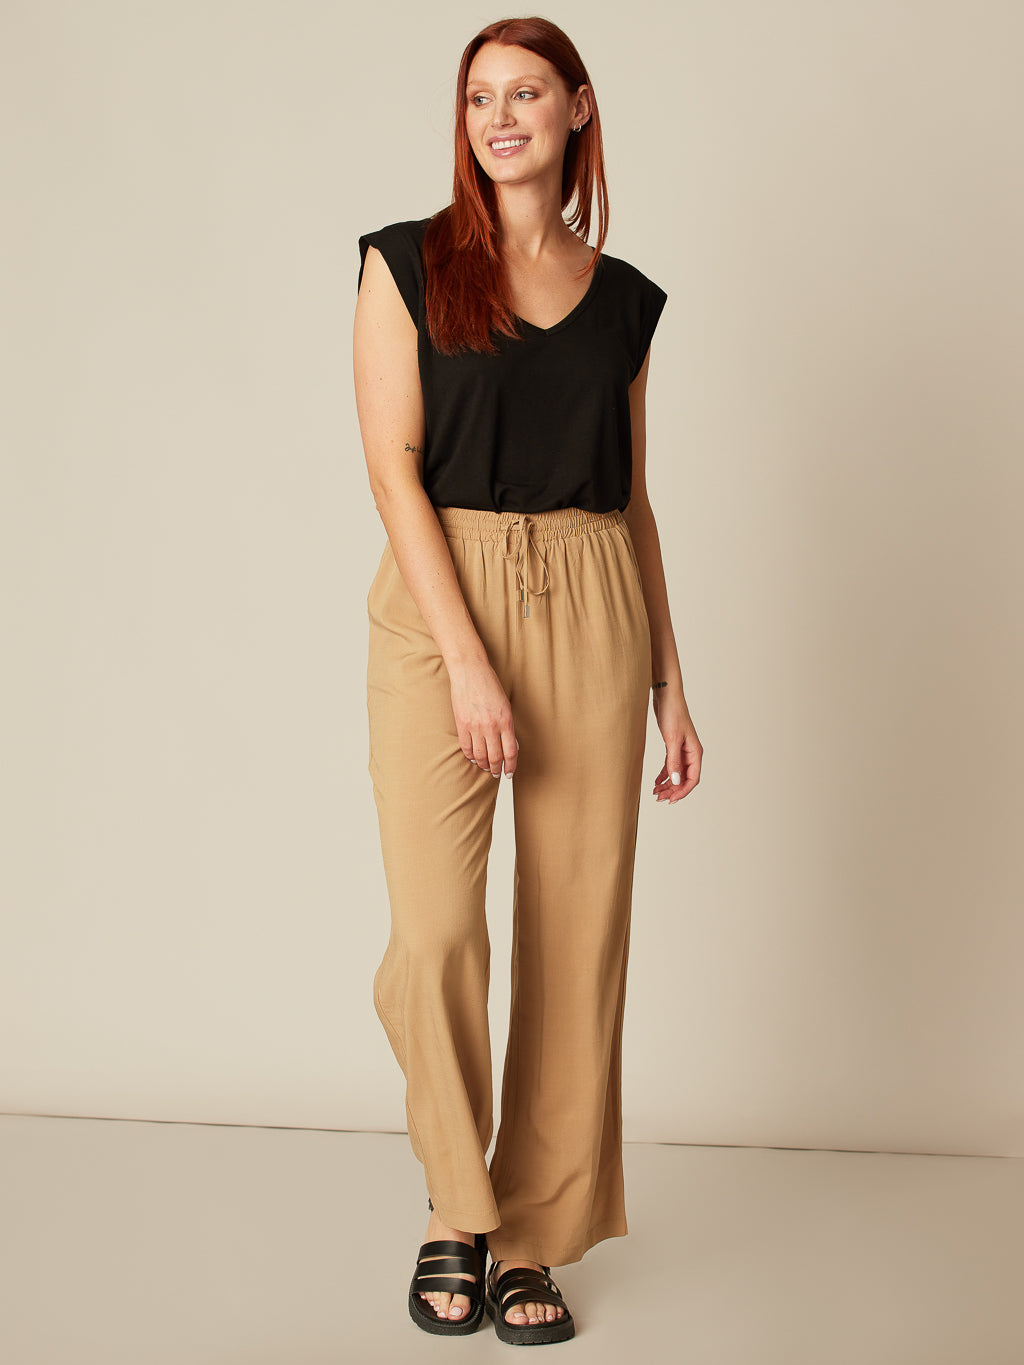 Straight casual pull-on pant